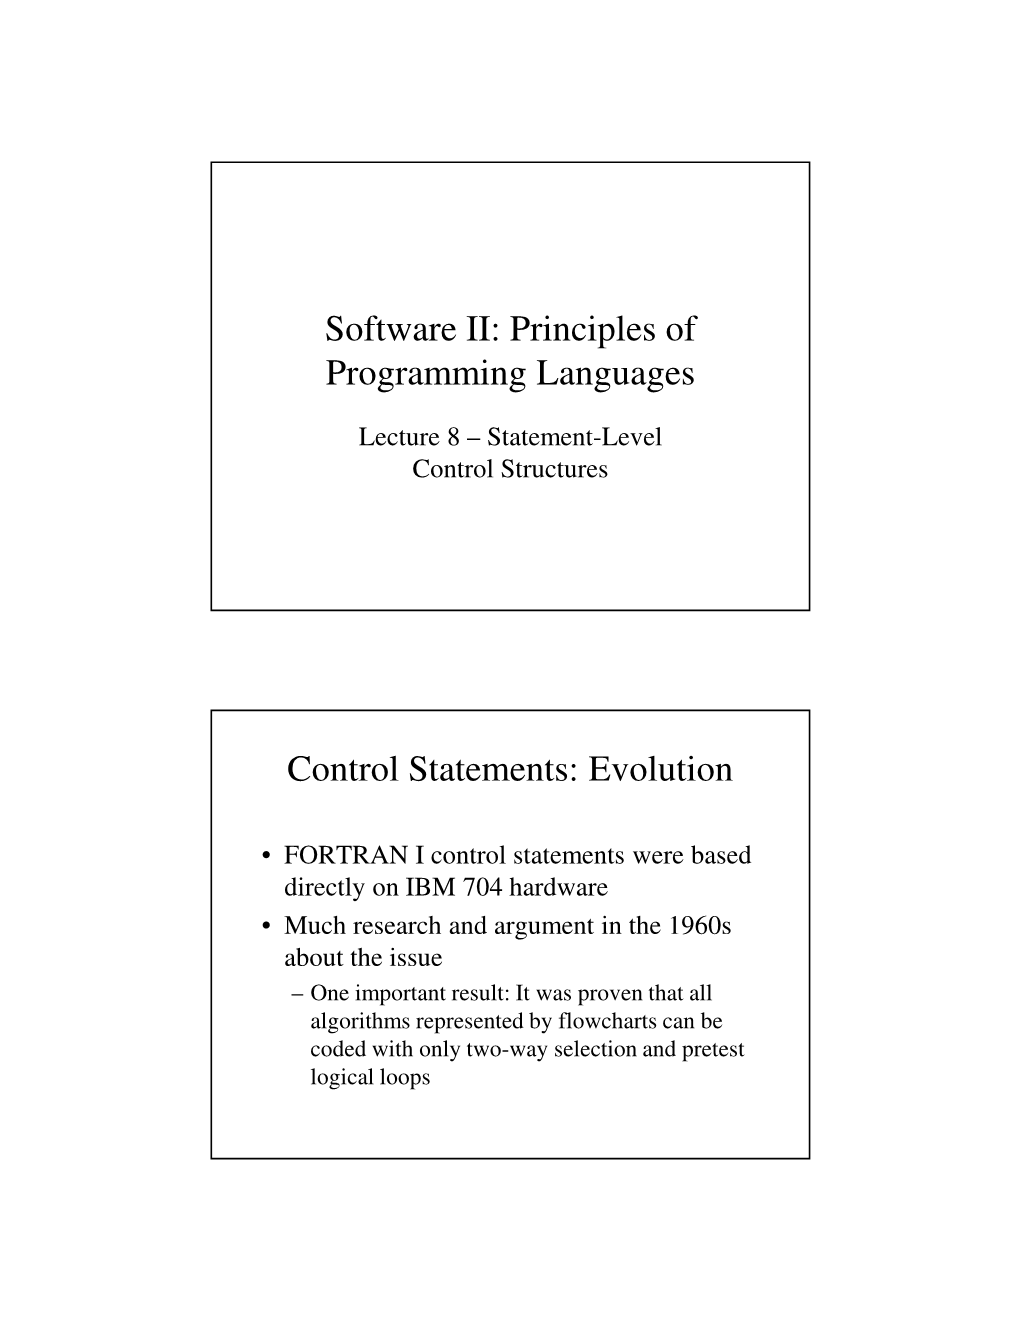 Software II: Principles of Programming Languages Control Statements